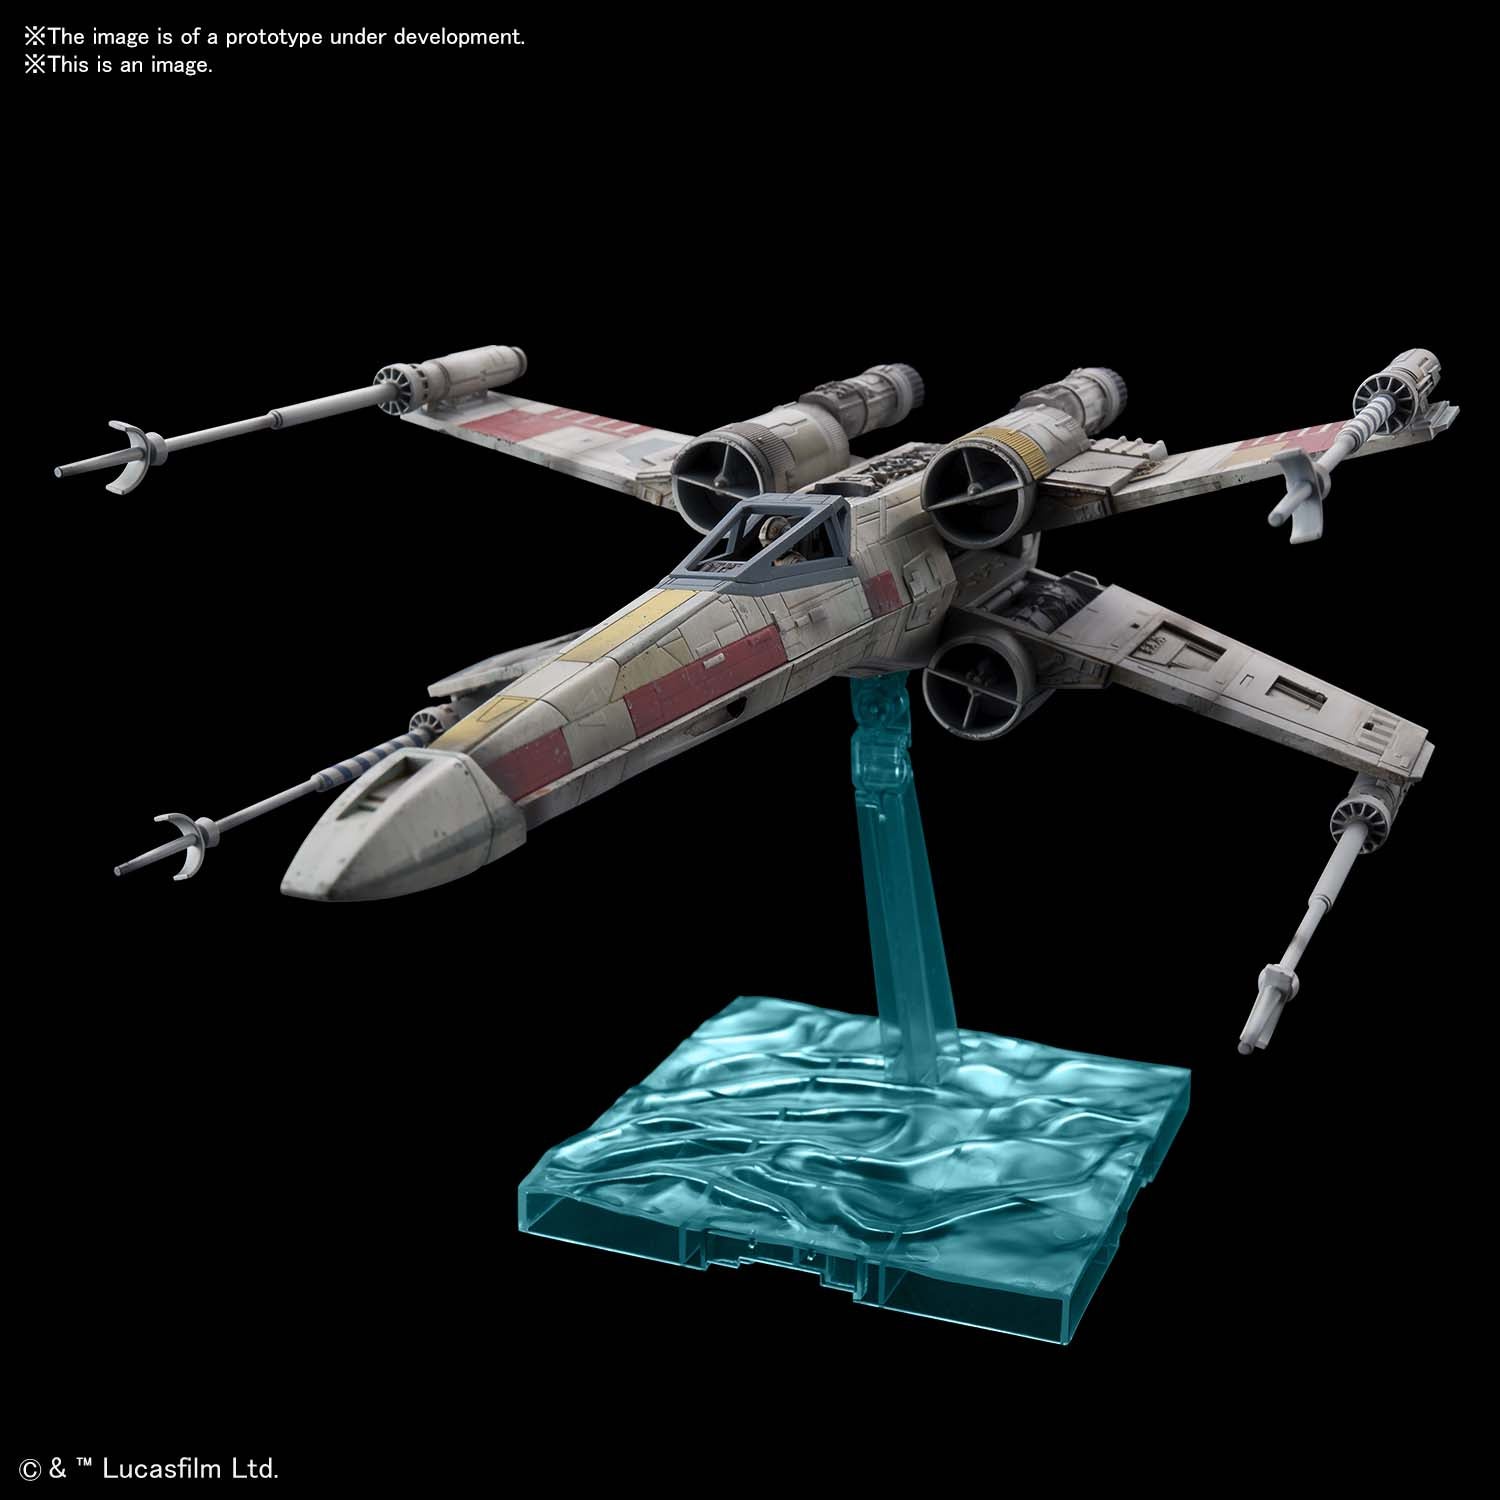 X-Wing Starfighter Red 5 (Rise of Skywalker) 1/72 Star Wars Model Kit #5061554 by Bandai